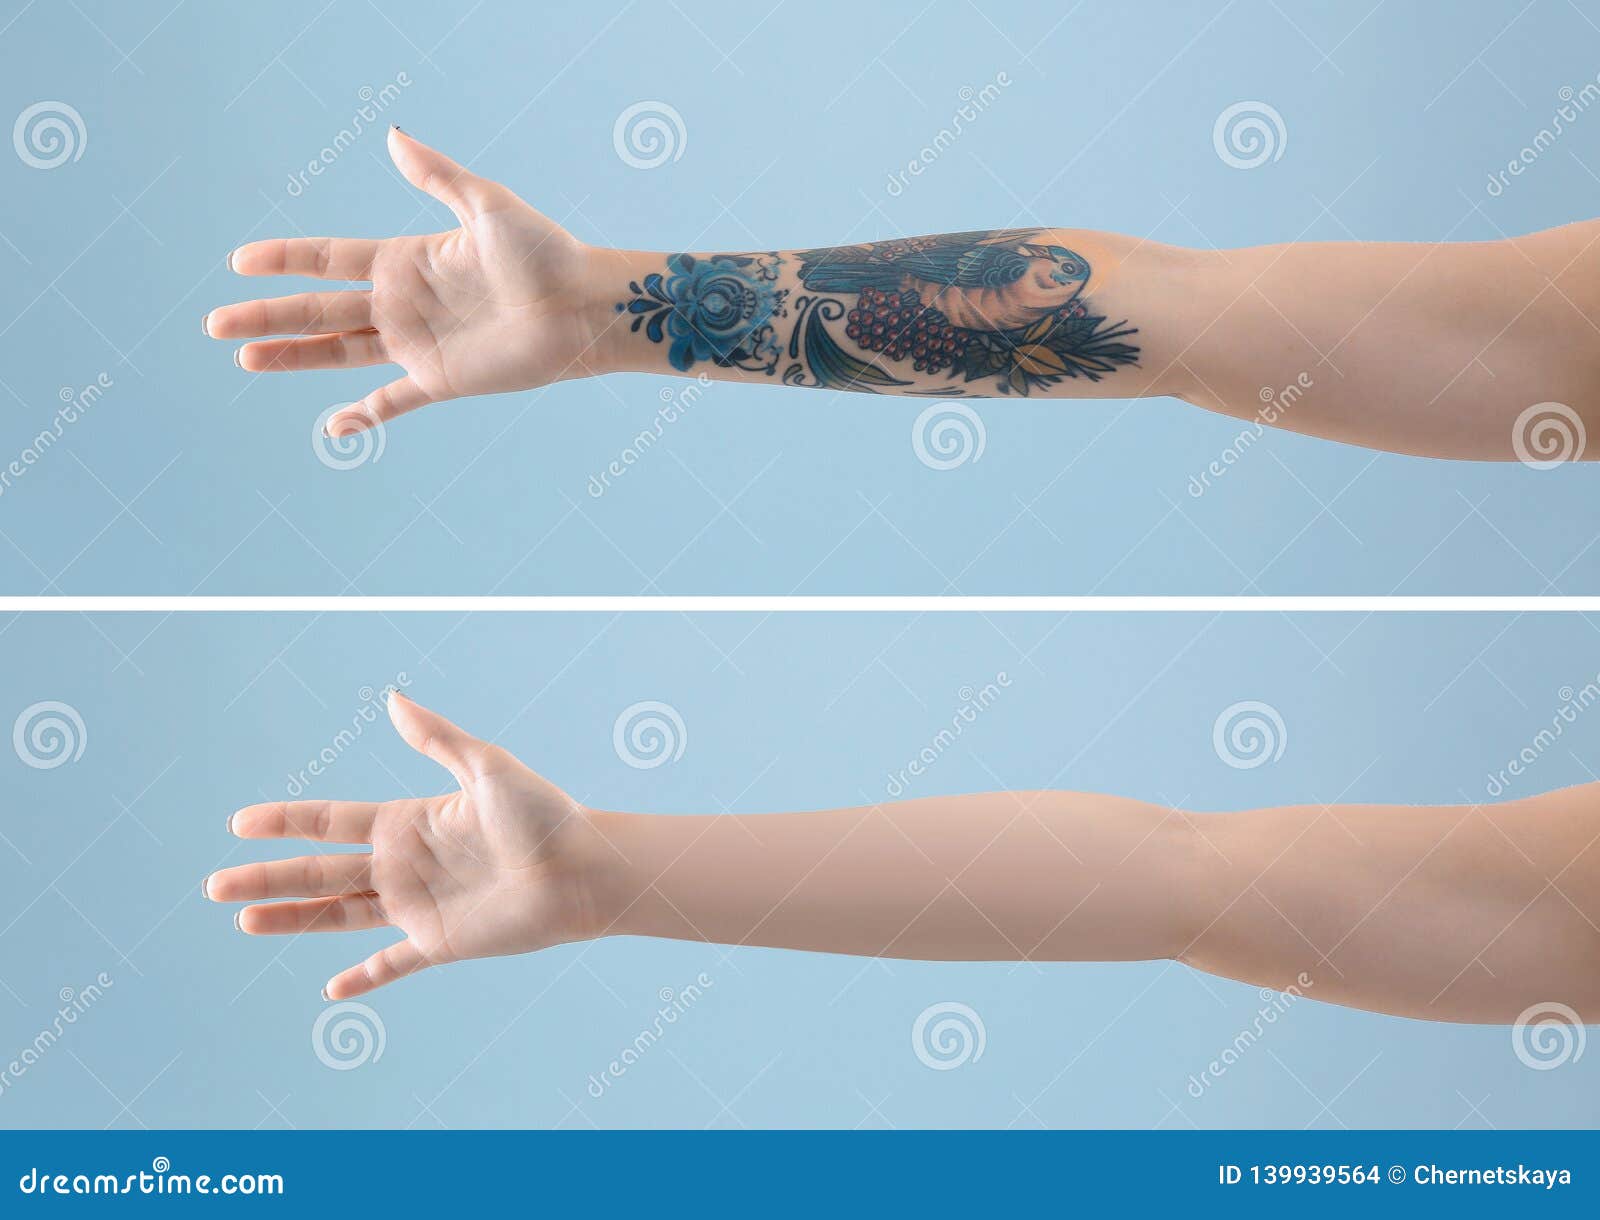 Ace Up His Sleeve Man with an Ace of Spades Tattoo on His Arm Stock Photo   Image of person adult 32323734